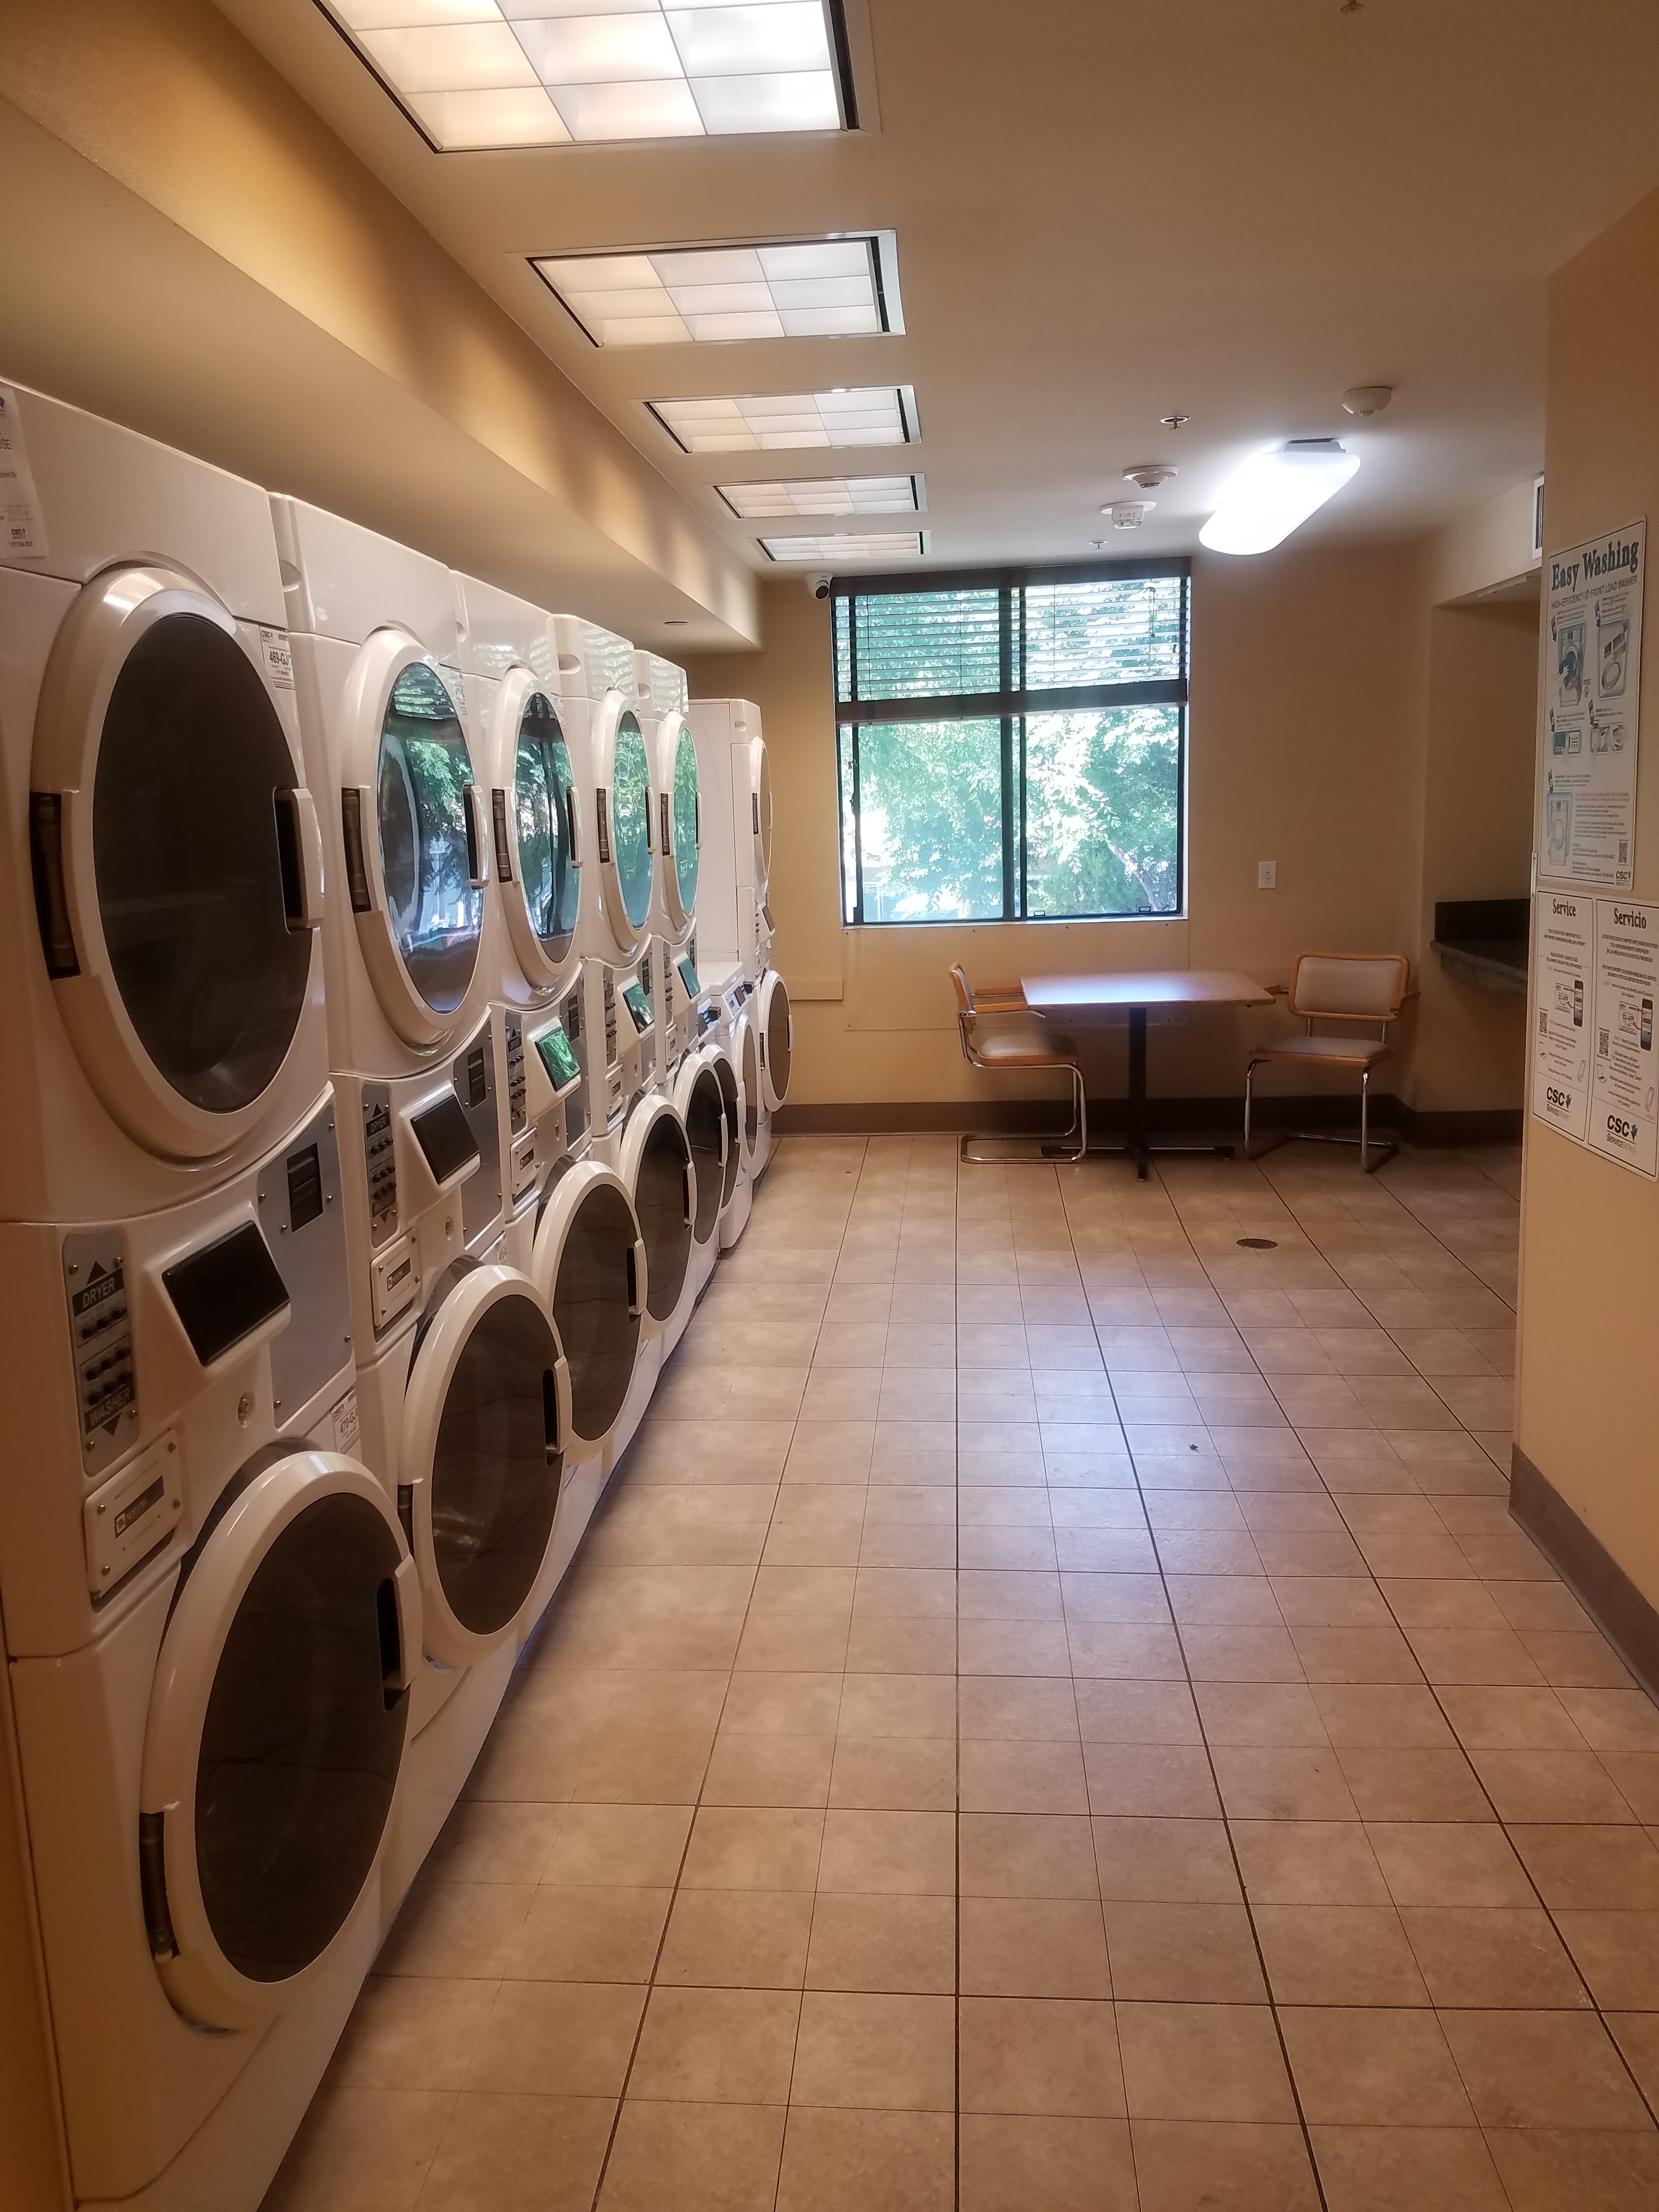 rittenhouse community laundry room. Several stacked washers and dryers. folding table and seating available.